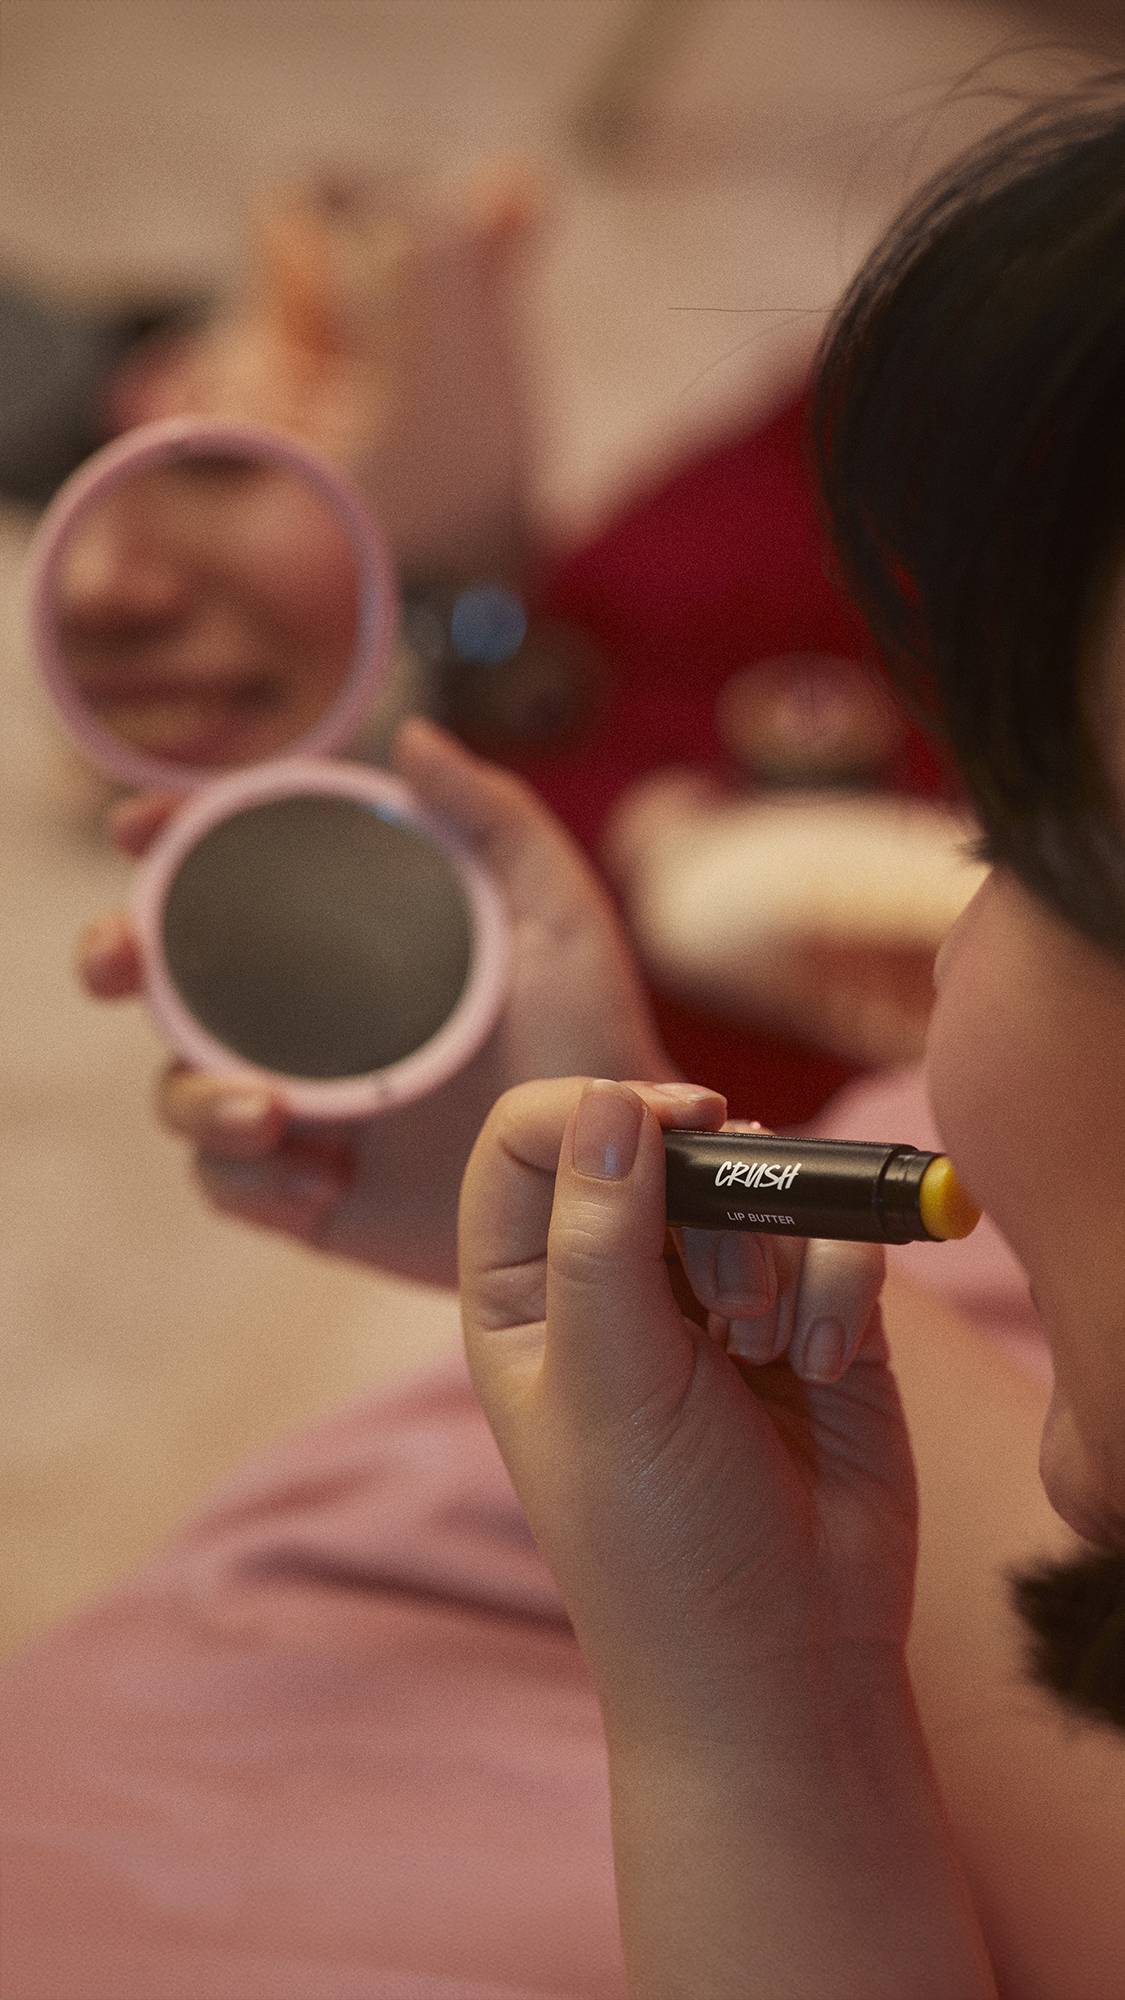 The image shows a super close-up of the model's hand as they are holding the Crush lip butter.